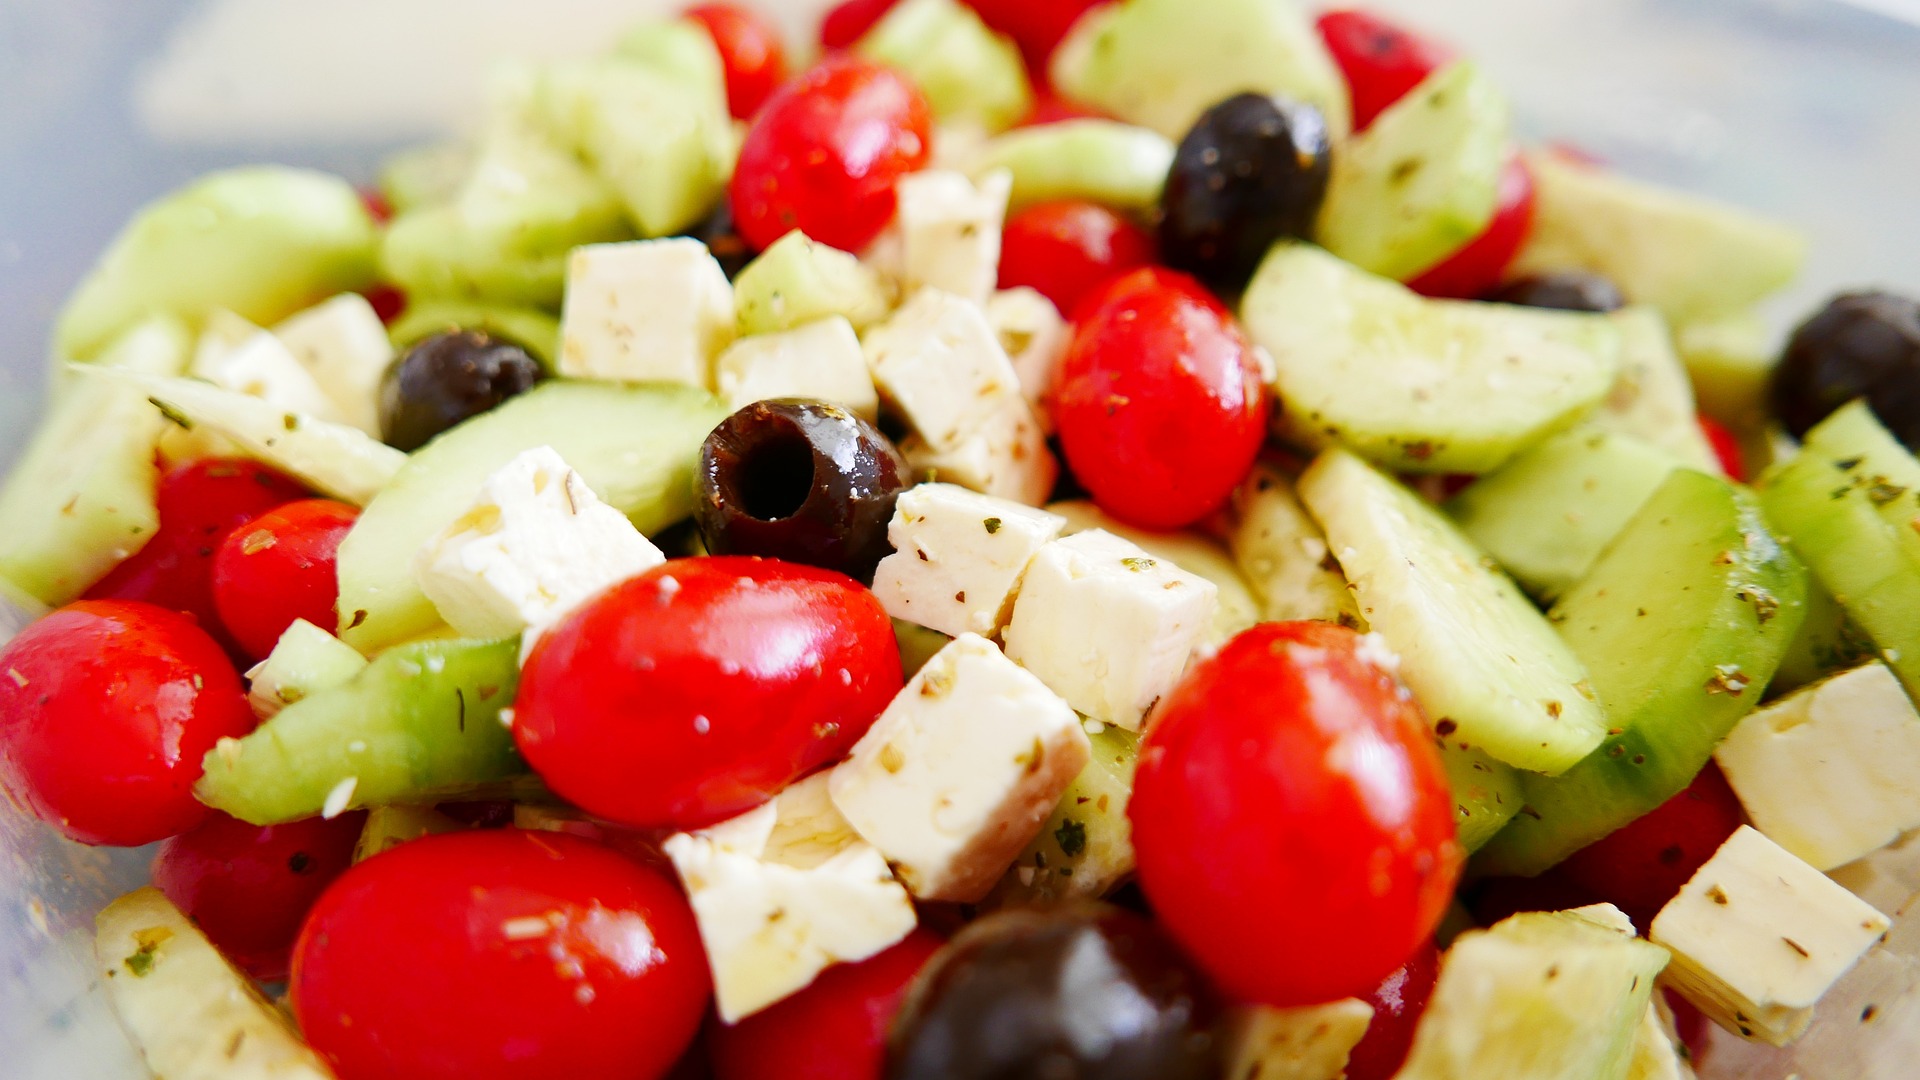 Debunking the Myth of the Mediterranean Diet: An In-depth Analysis by Dr. Zoe Harcombe